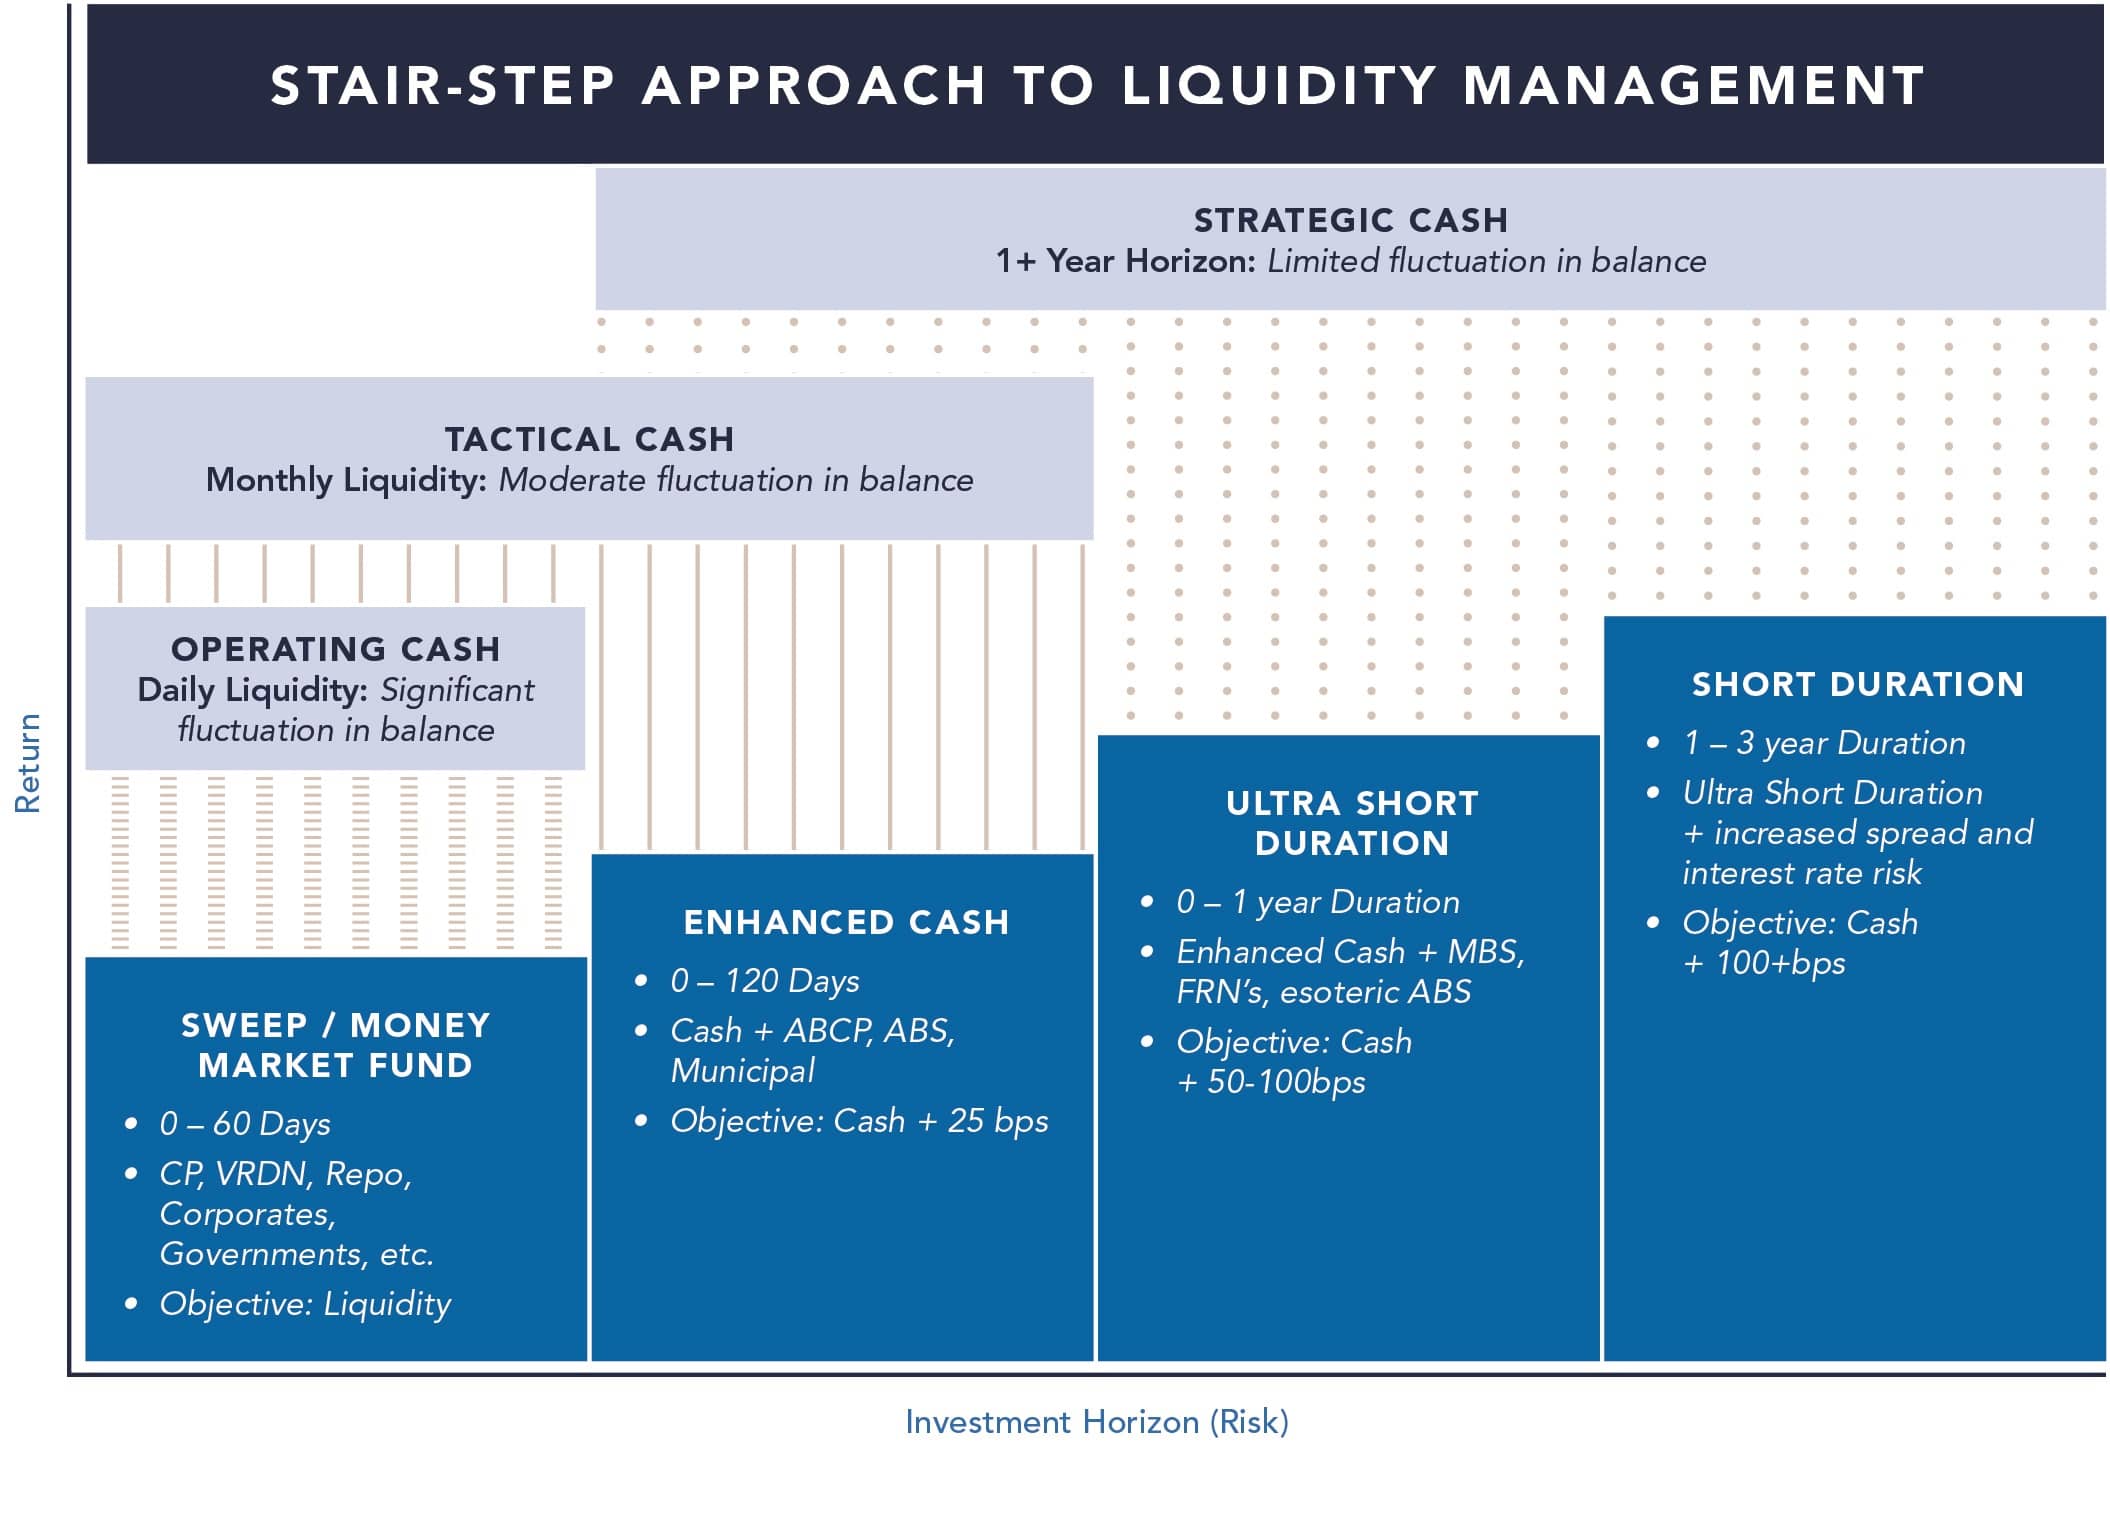 Stair-step approach to liquidity management